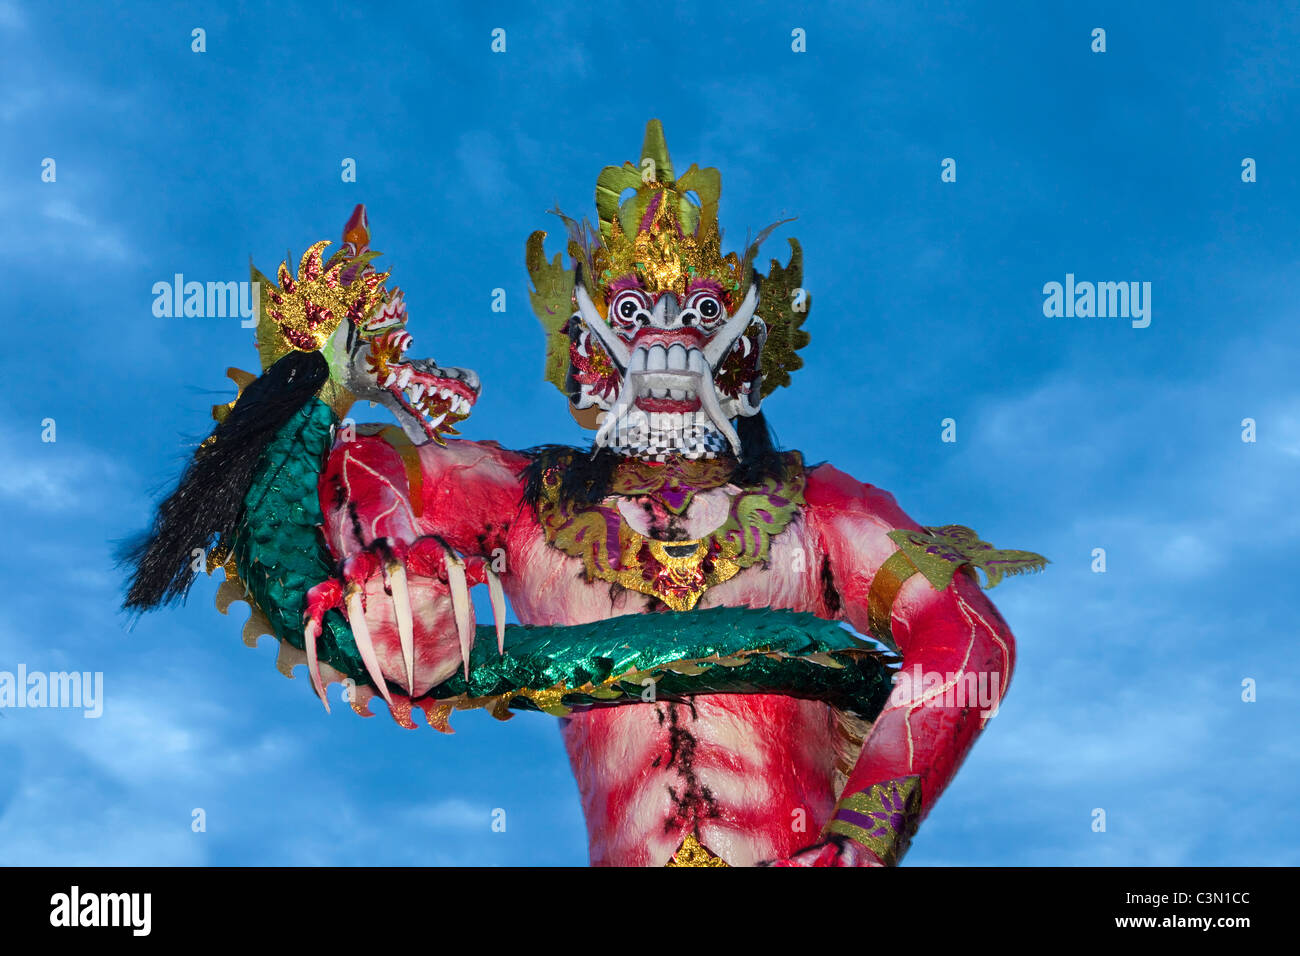 Indonesia, Ogoh-Ogoh festival,Balinese new year Huge monsters dolls with menacing fingers and frightening faces Stock Photo